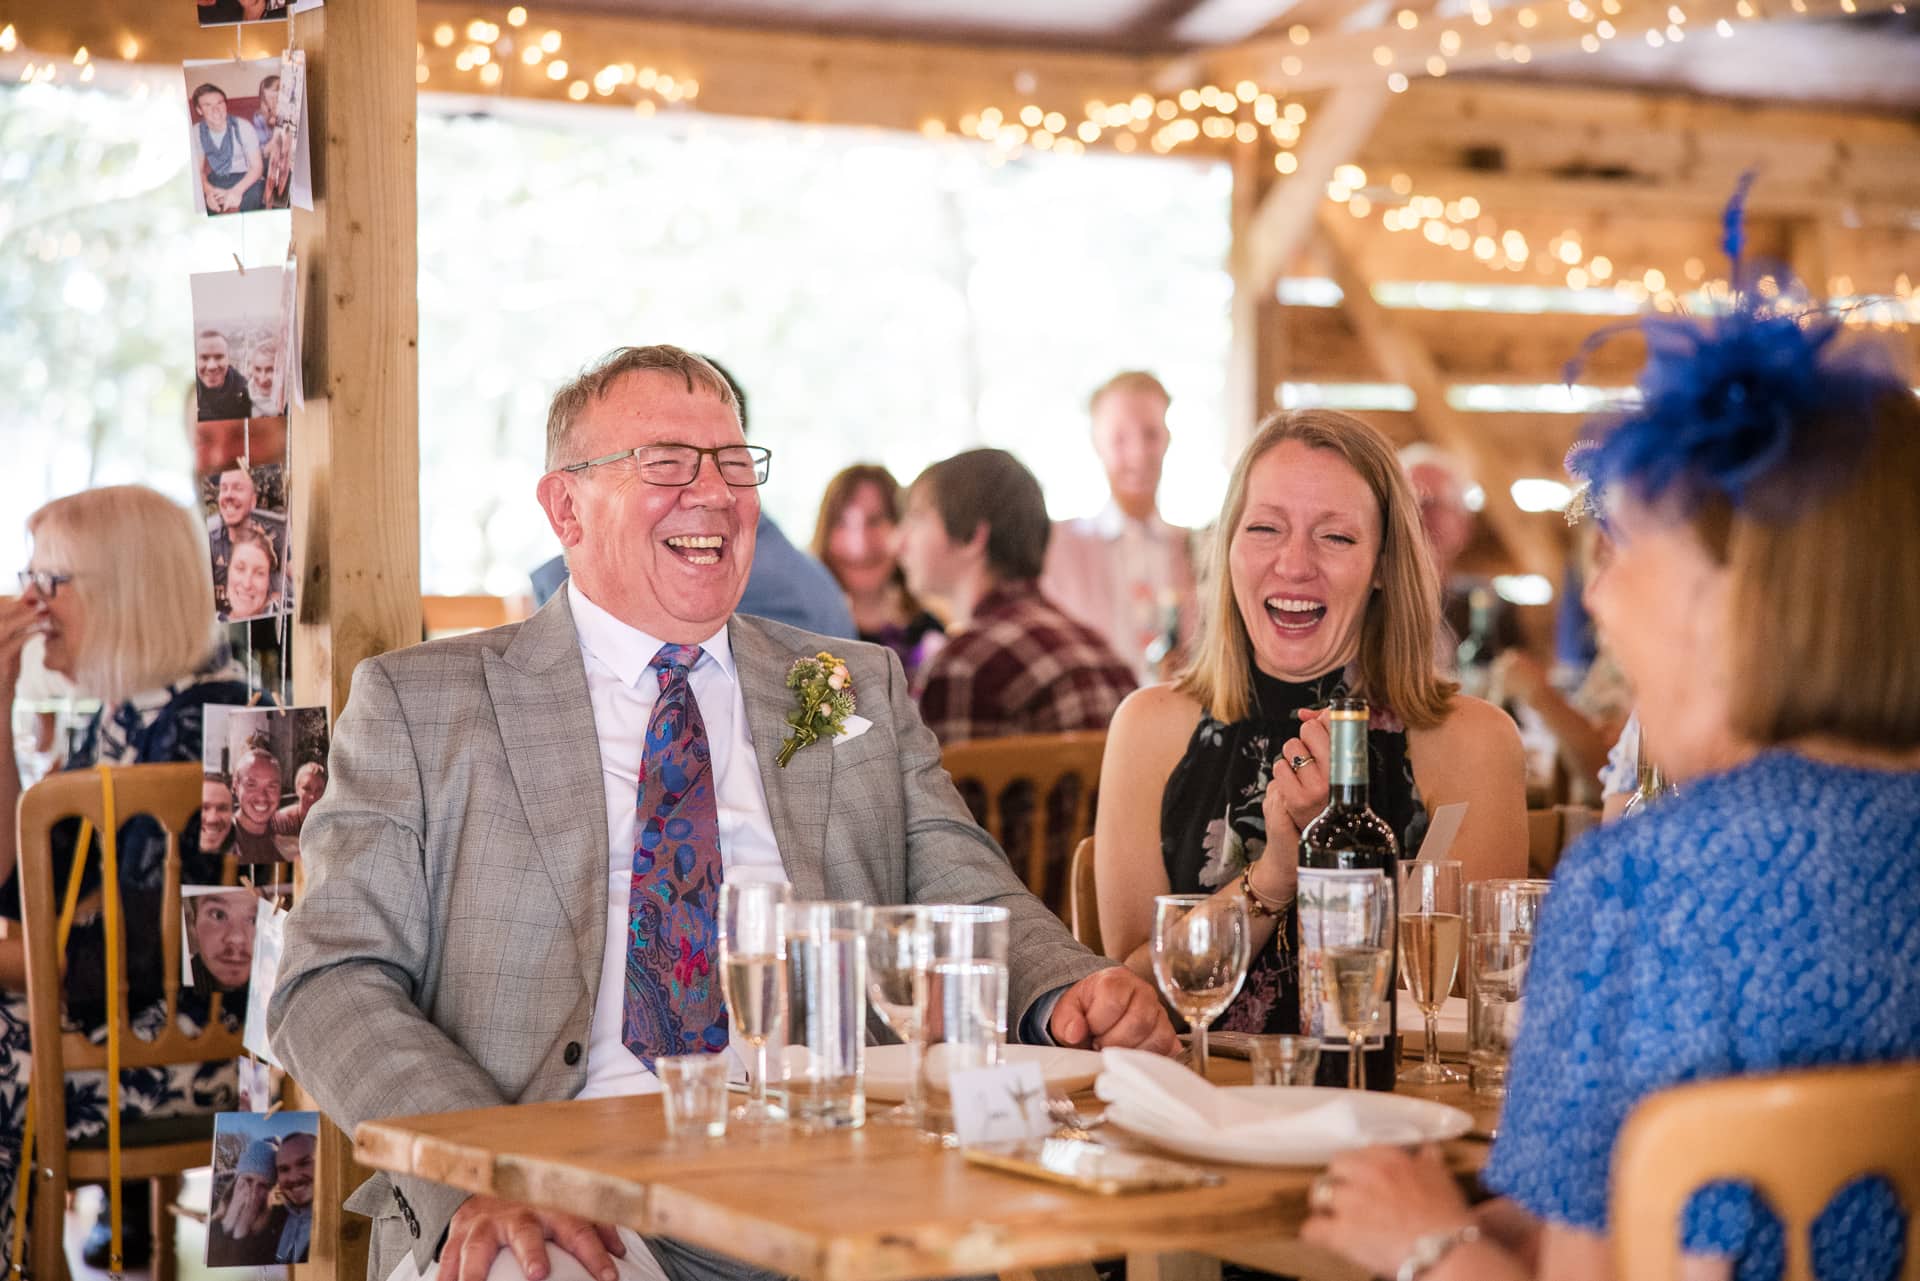 Guests laughing during the speeches